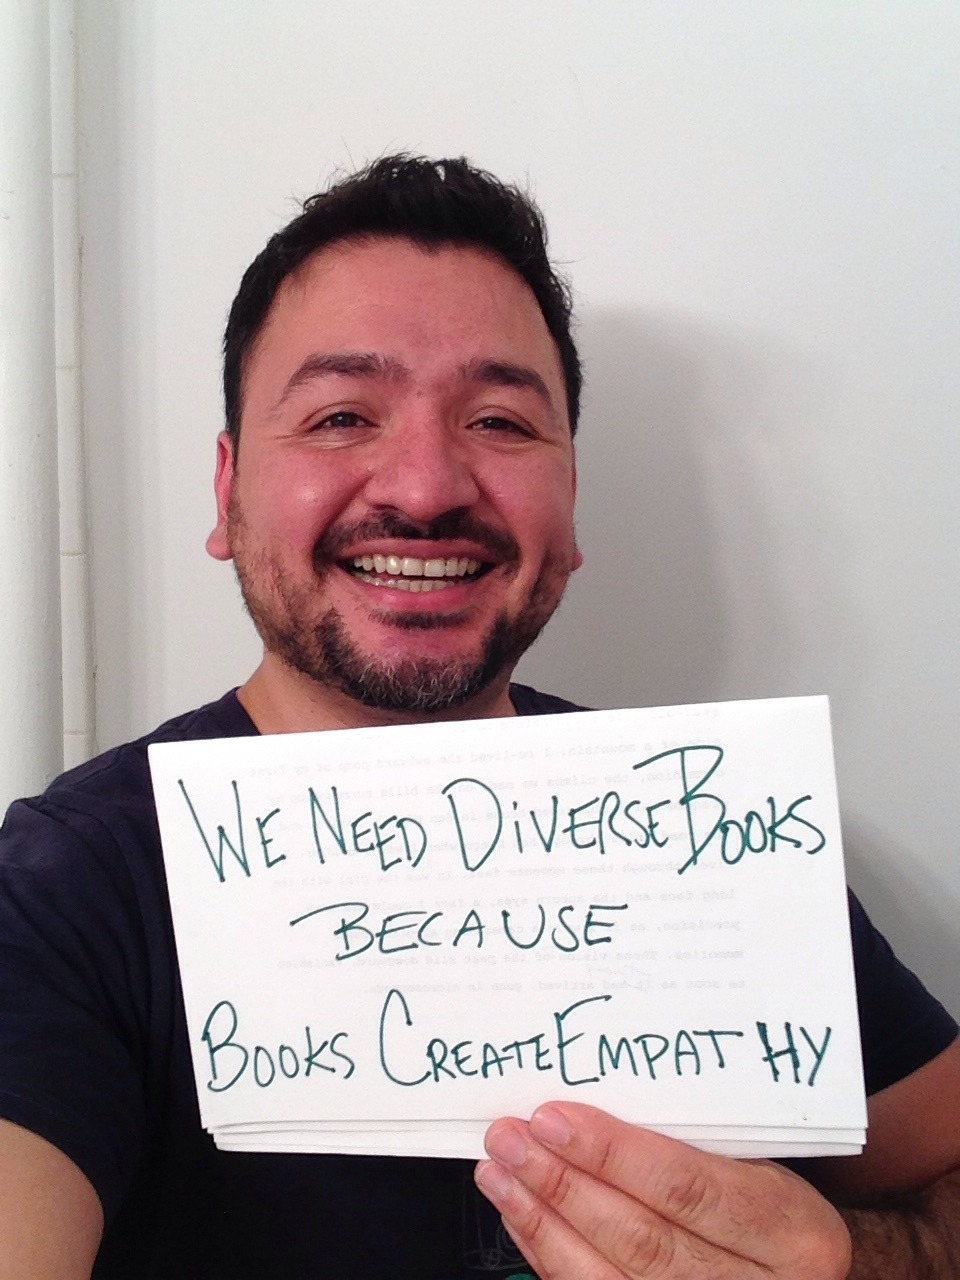 #WeNeedDiverseBooks because books create empathy. I am Cesar Torres, the author of the YA novel The 13 Secret Cities. Thank you